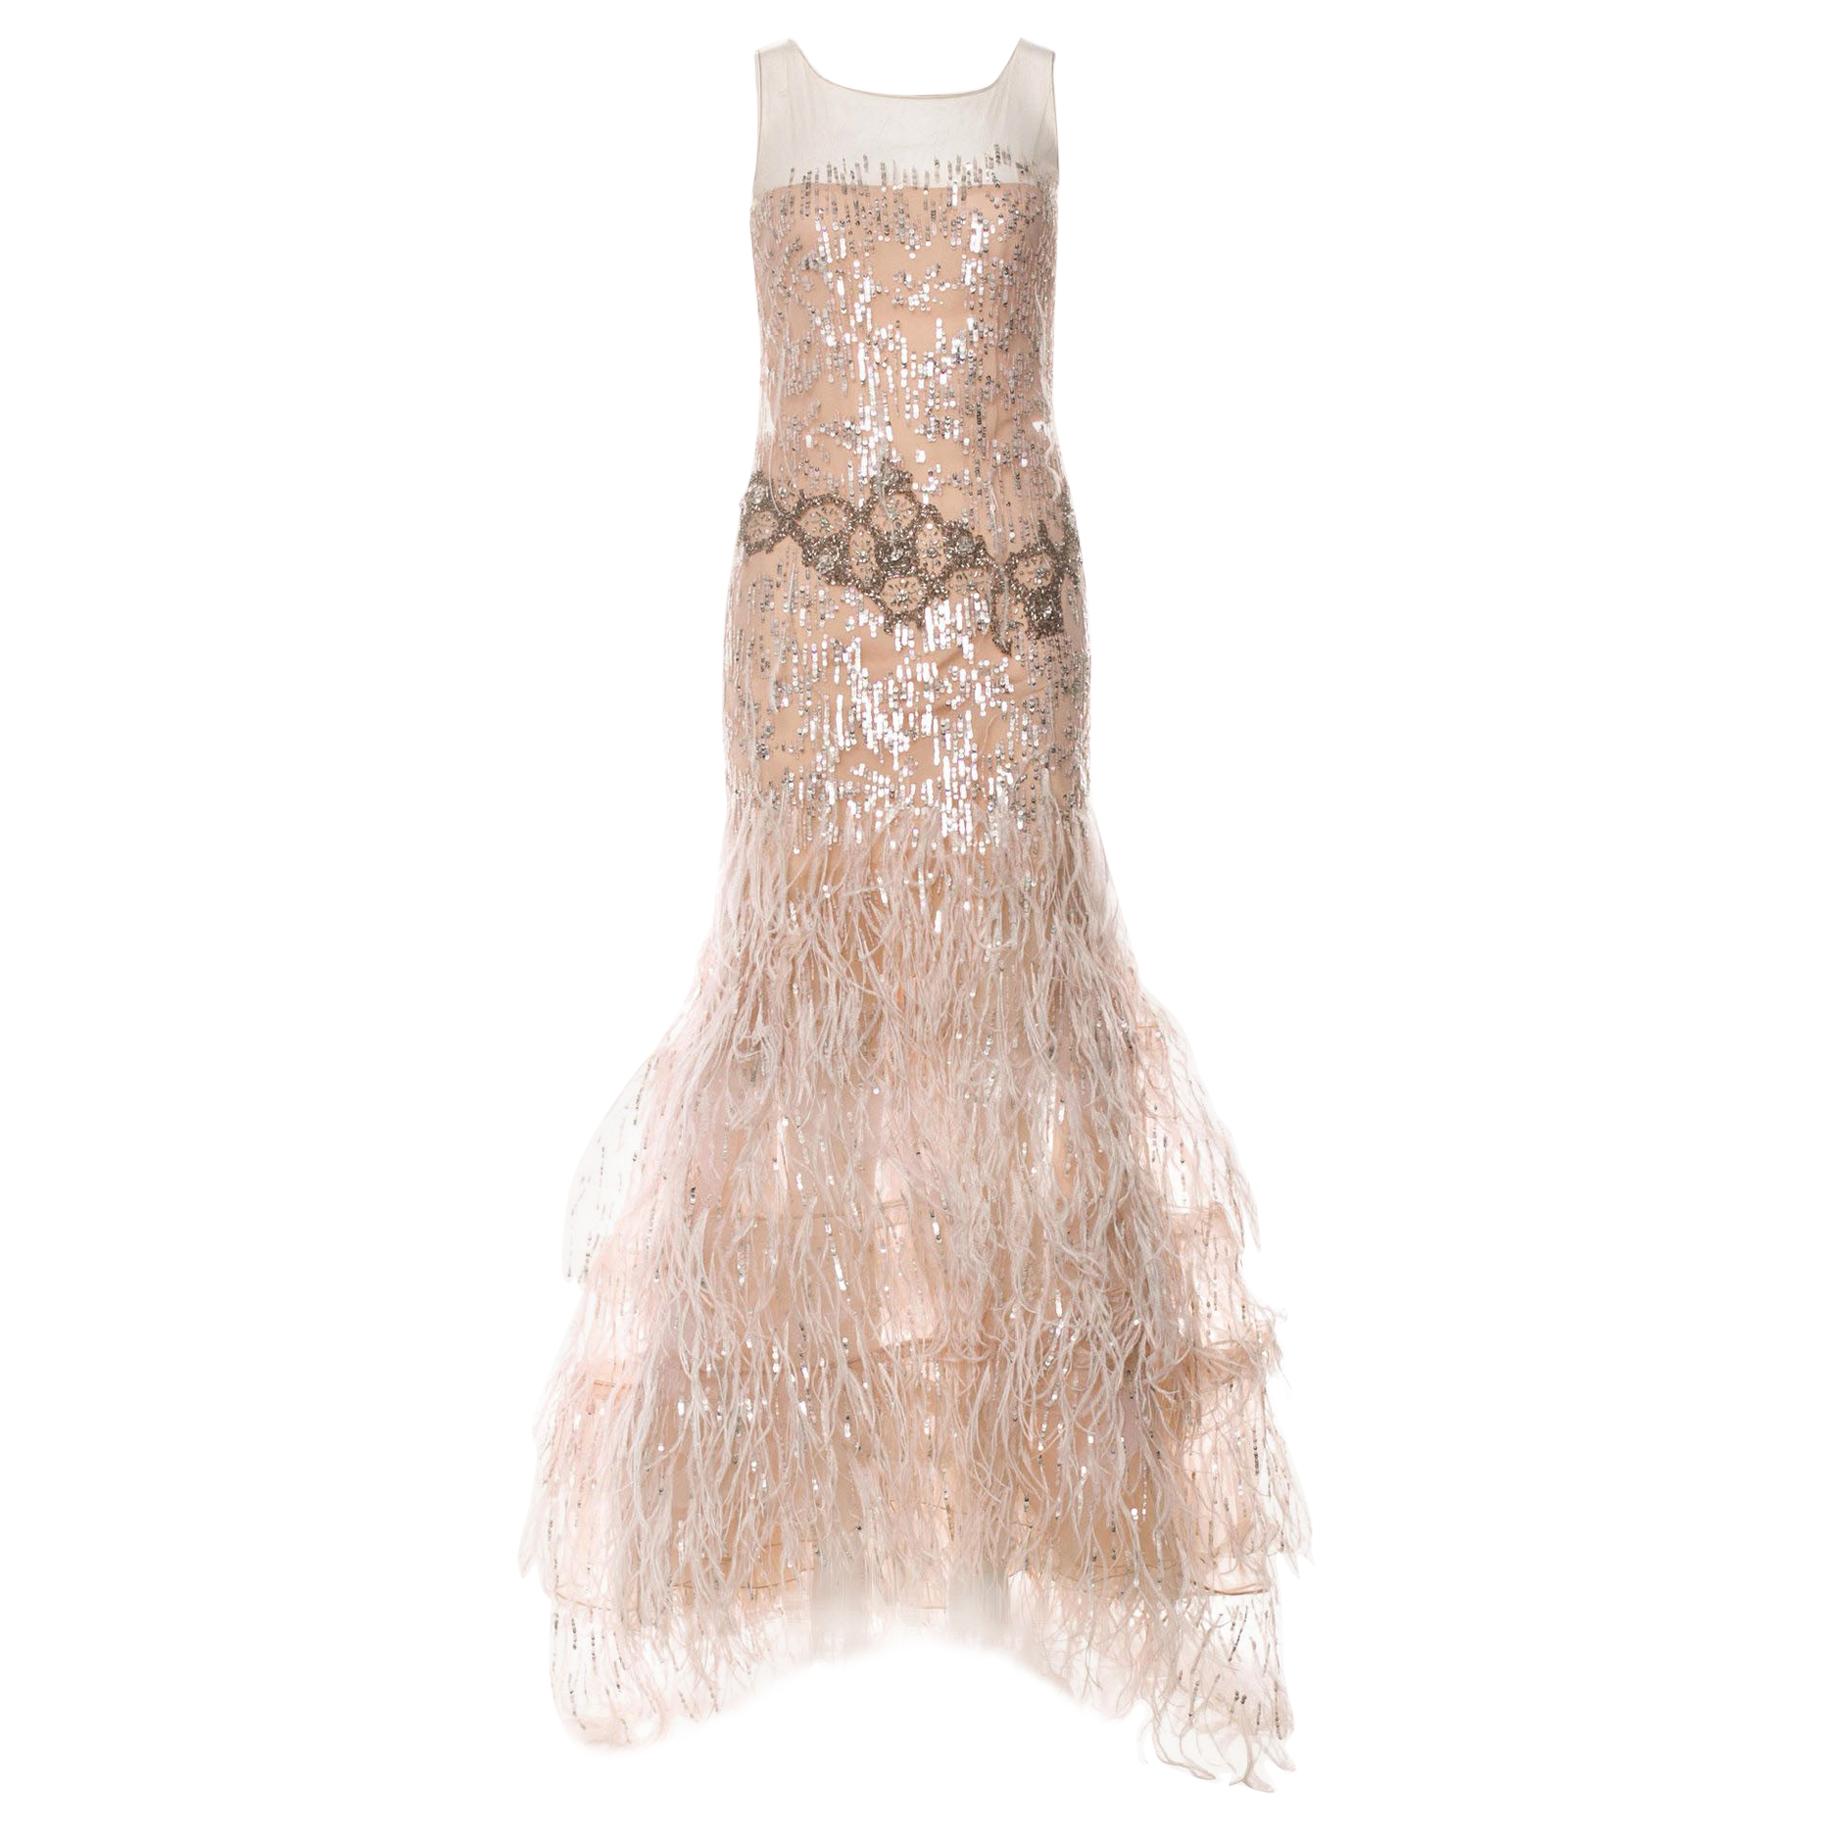 OSCAR DE LA RENTA FEATHER and SEQUIN EMBELLISHED NUDE TULLE GOWN